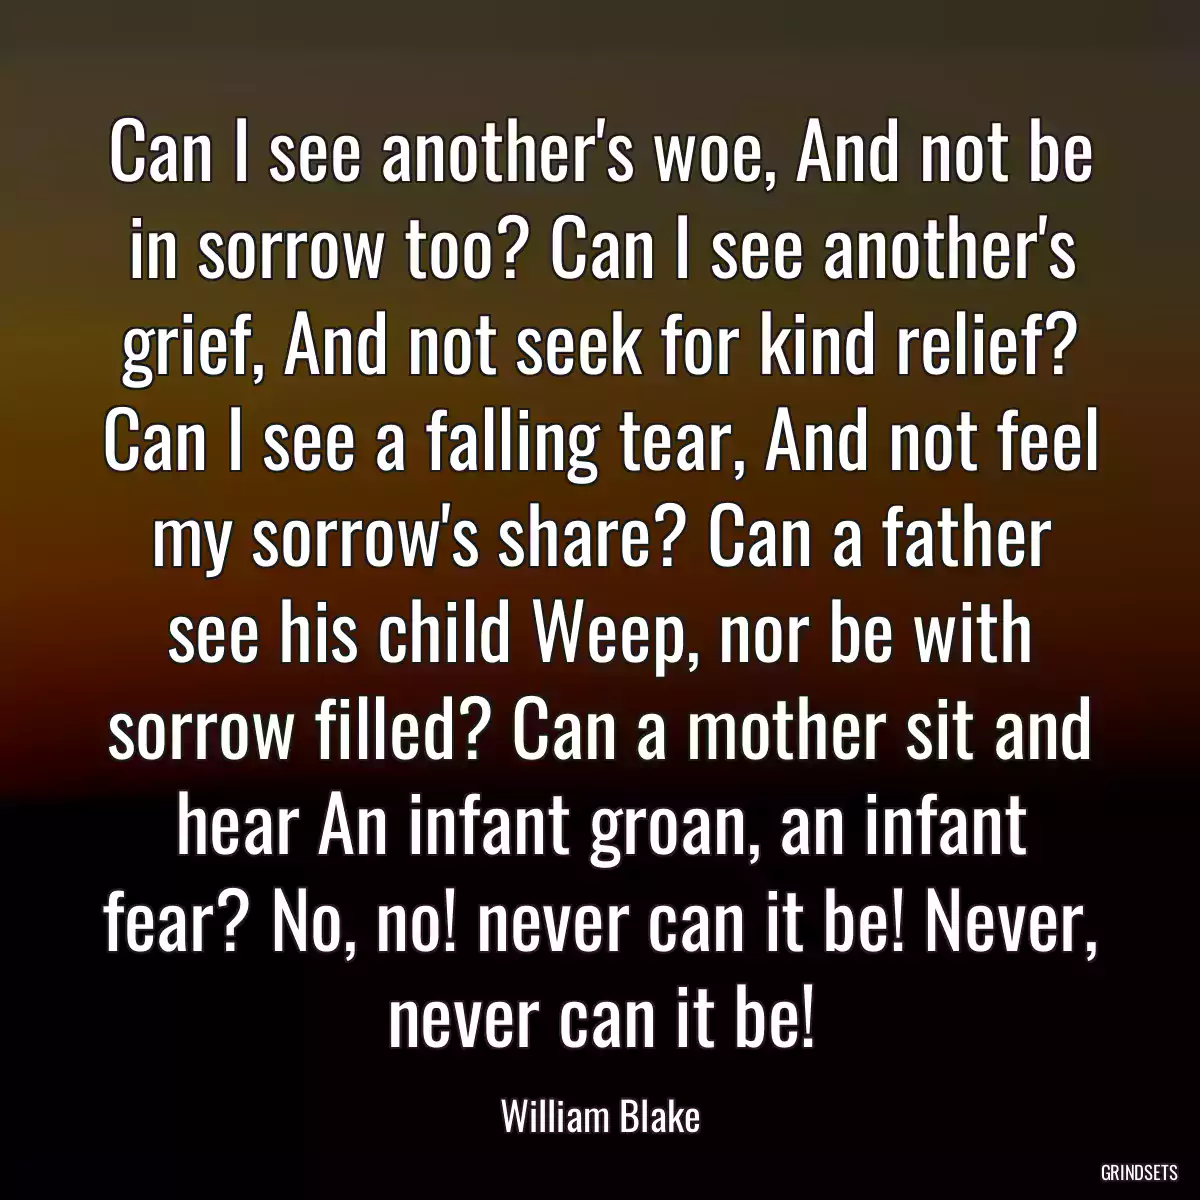 Can I see another\'s woe, And not be in sorrow too? Can I see another\'s grief, And not seek for kind relief? Can I see a falling tear, And not feel my sorrow\'s share? Can a father see his child Weep, nor be with sorrow filled? Can a mother sit and hear An infant groan, an infant fear? No, no! never can it be! Never, never can it be!